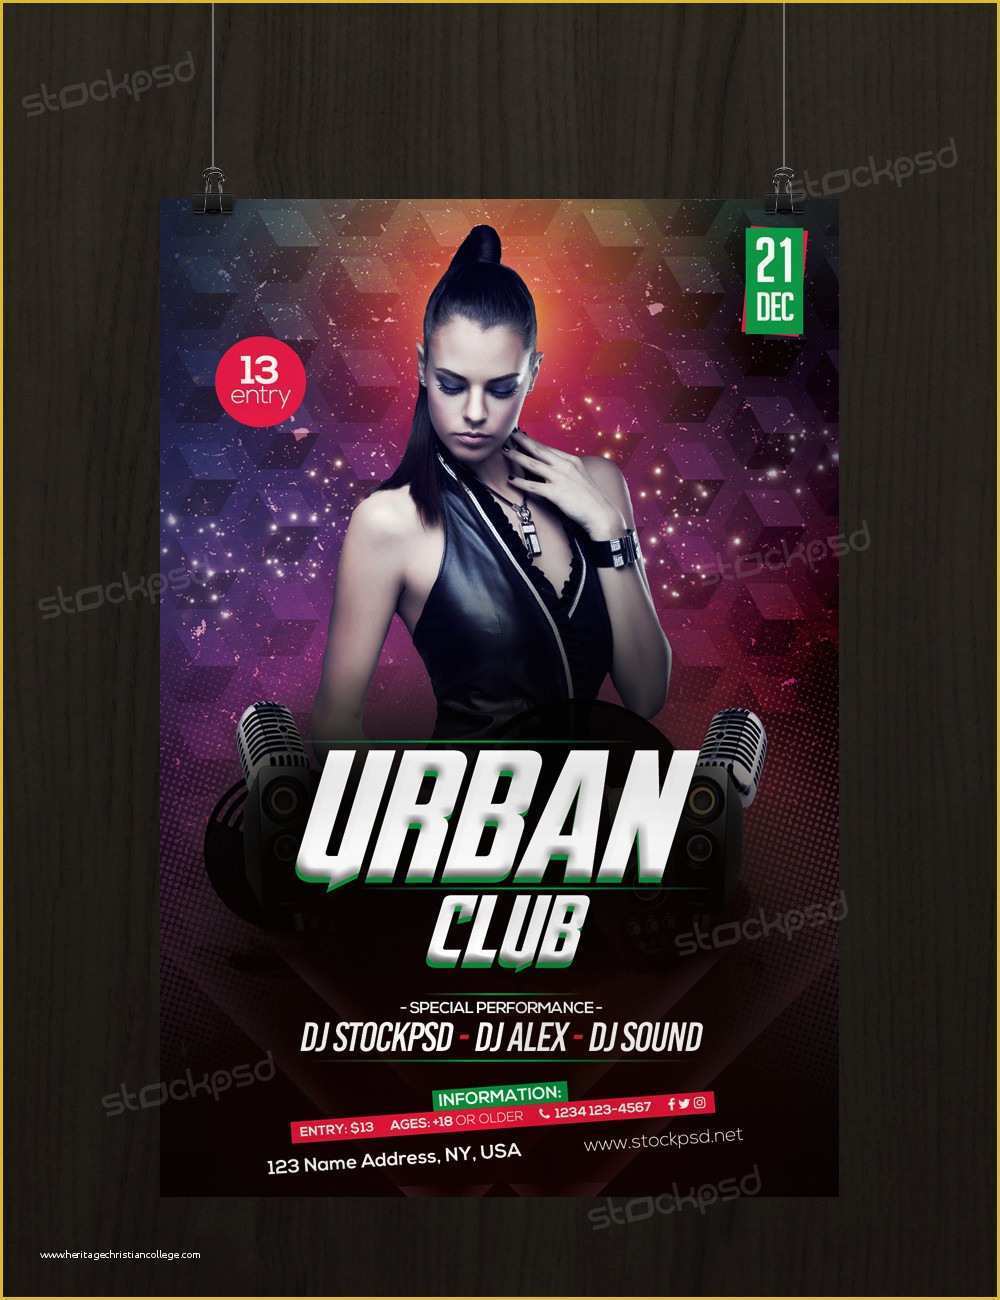 Flyer Templates Free Download Of Urban Club Download Free Psd Flyer Template Stockpsd